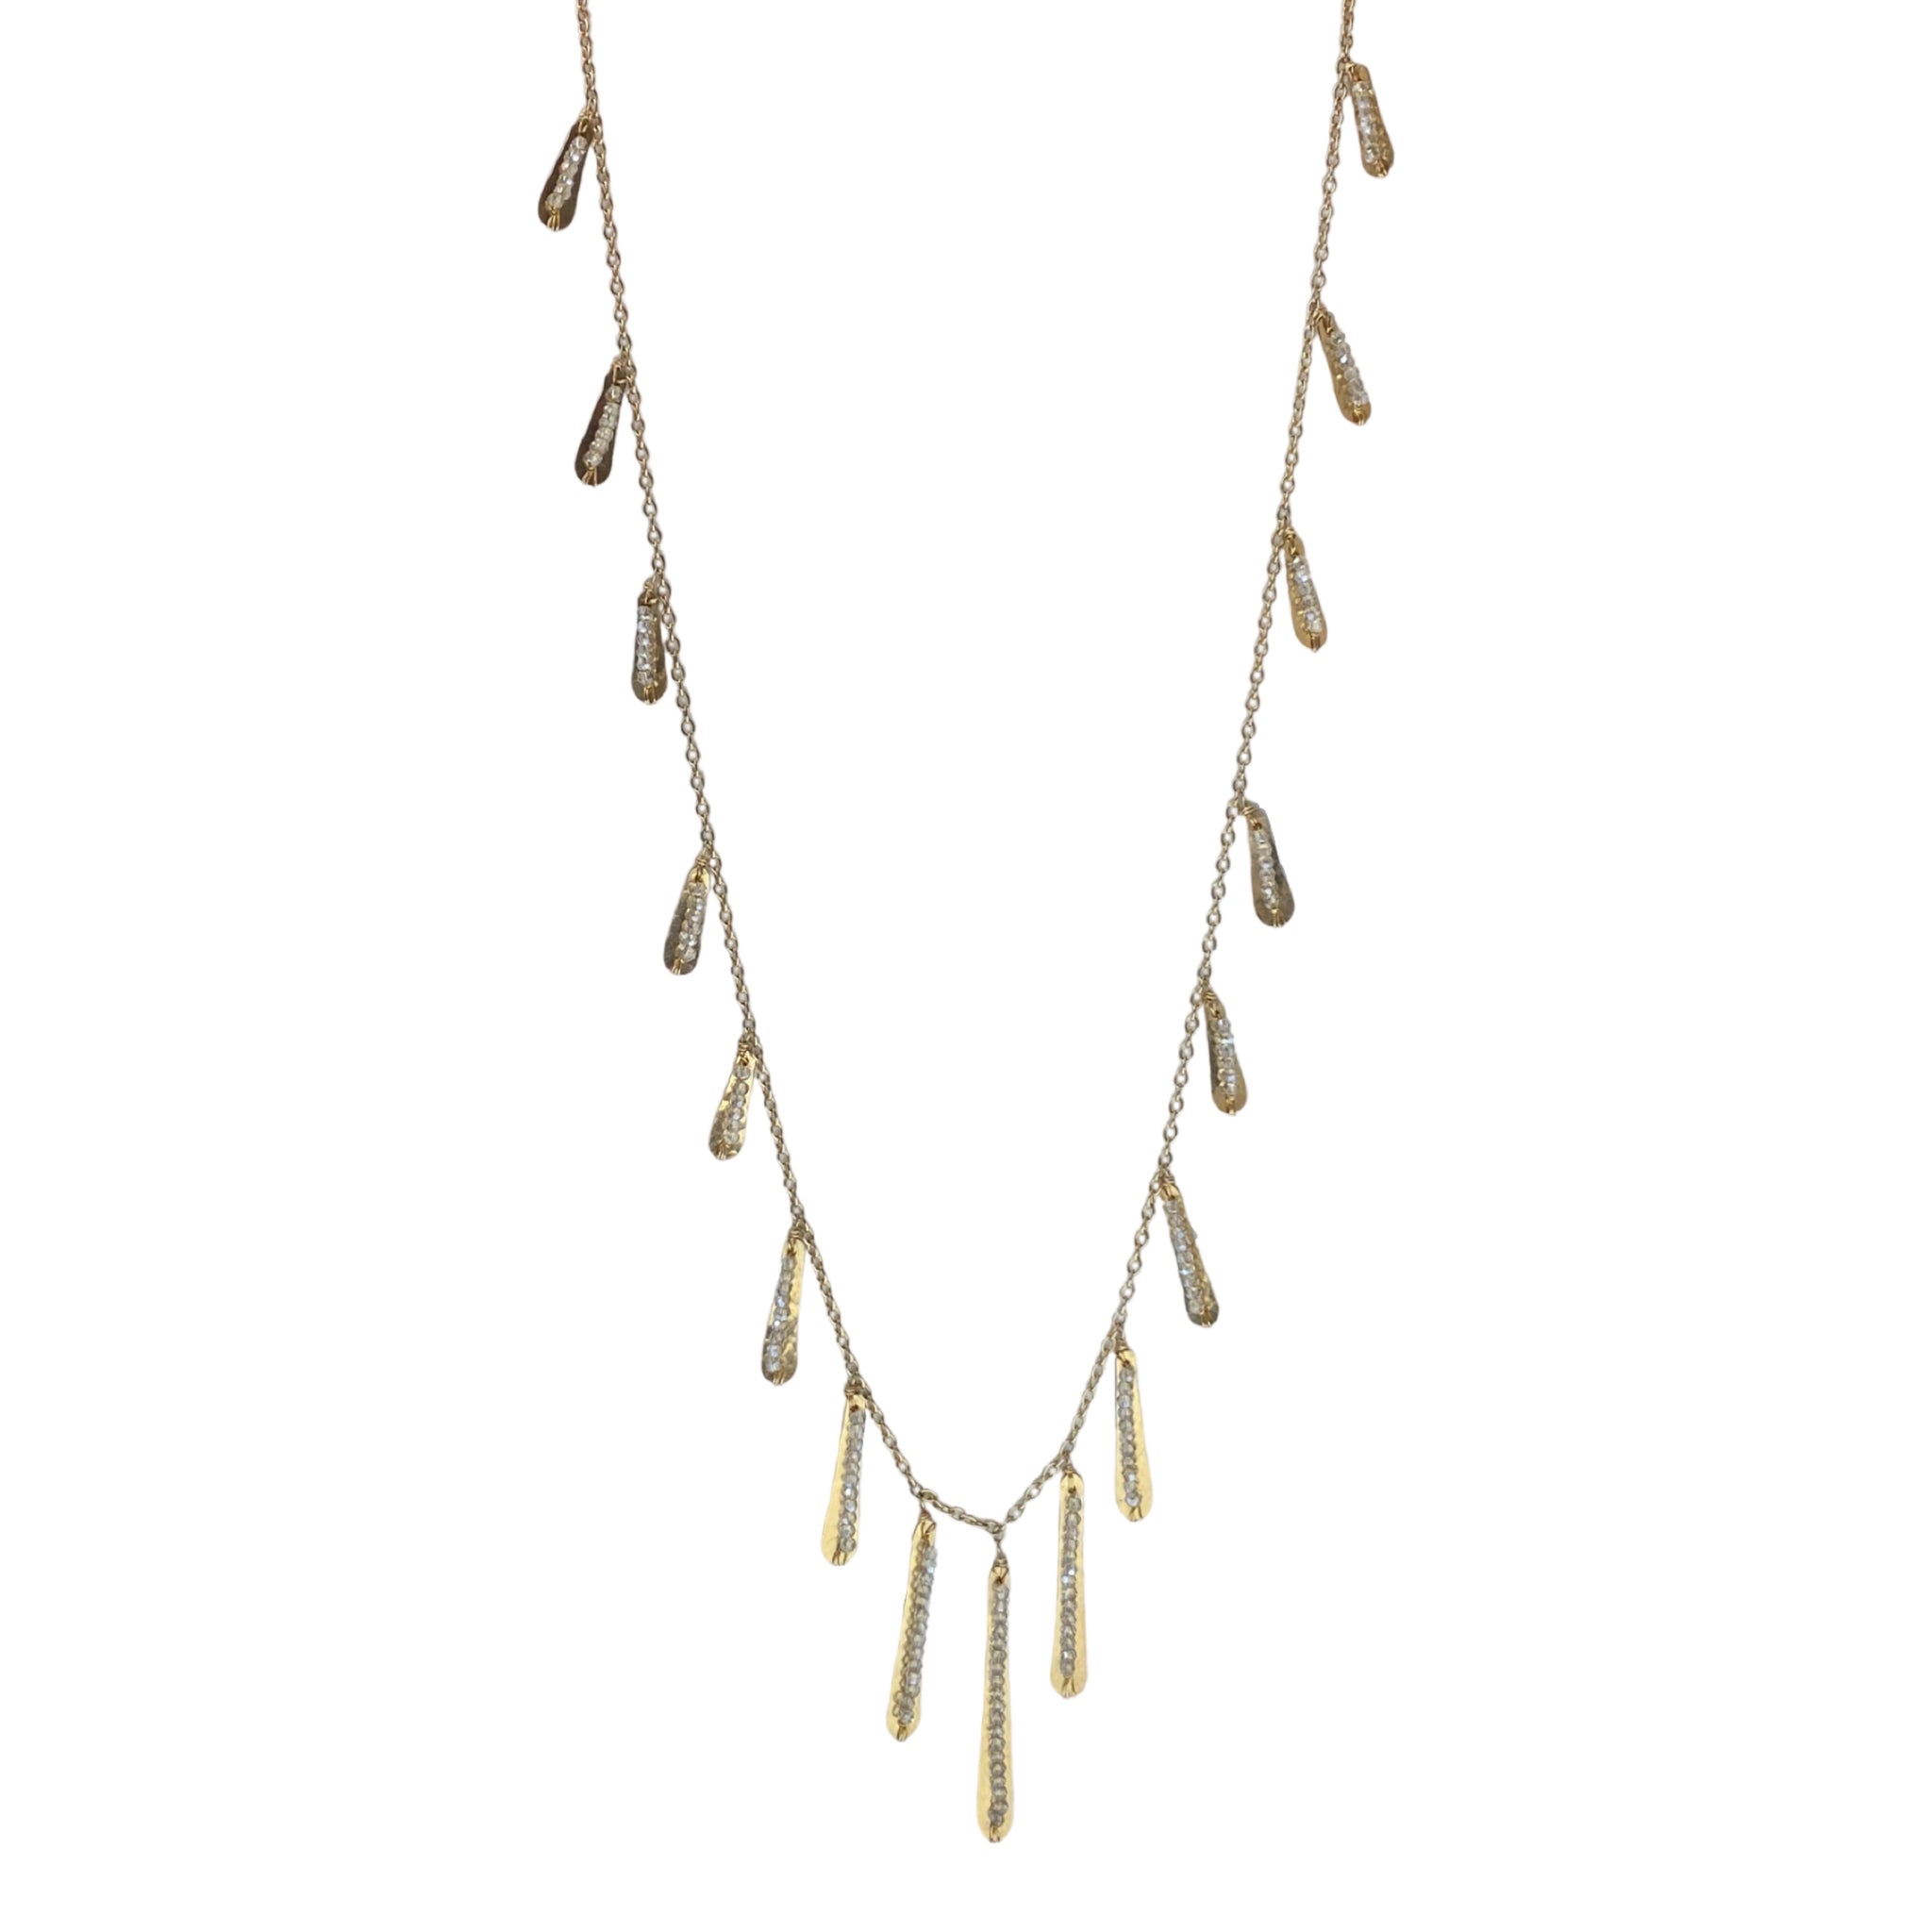 Dana Kellin Gold Fringe Necklace - This sassy Dana Kellin necklace has all the right moves; the hand-hammered fringe dances while the smokey crystals sparkle as they catch the light. Wear it for a night out or add a little extra something to your jeans and t-shirt.  Available at Shaylula Jewlery & Gifts in Tarrytown, NY and online. • 14k gold filled, crystal  • 30" L  • Lobster clasp